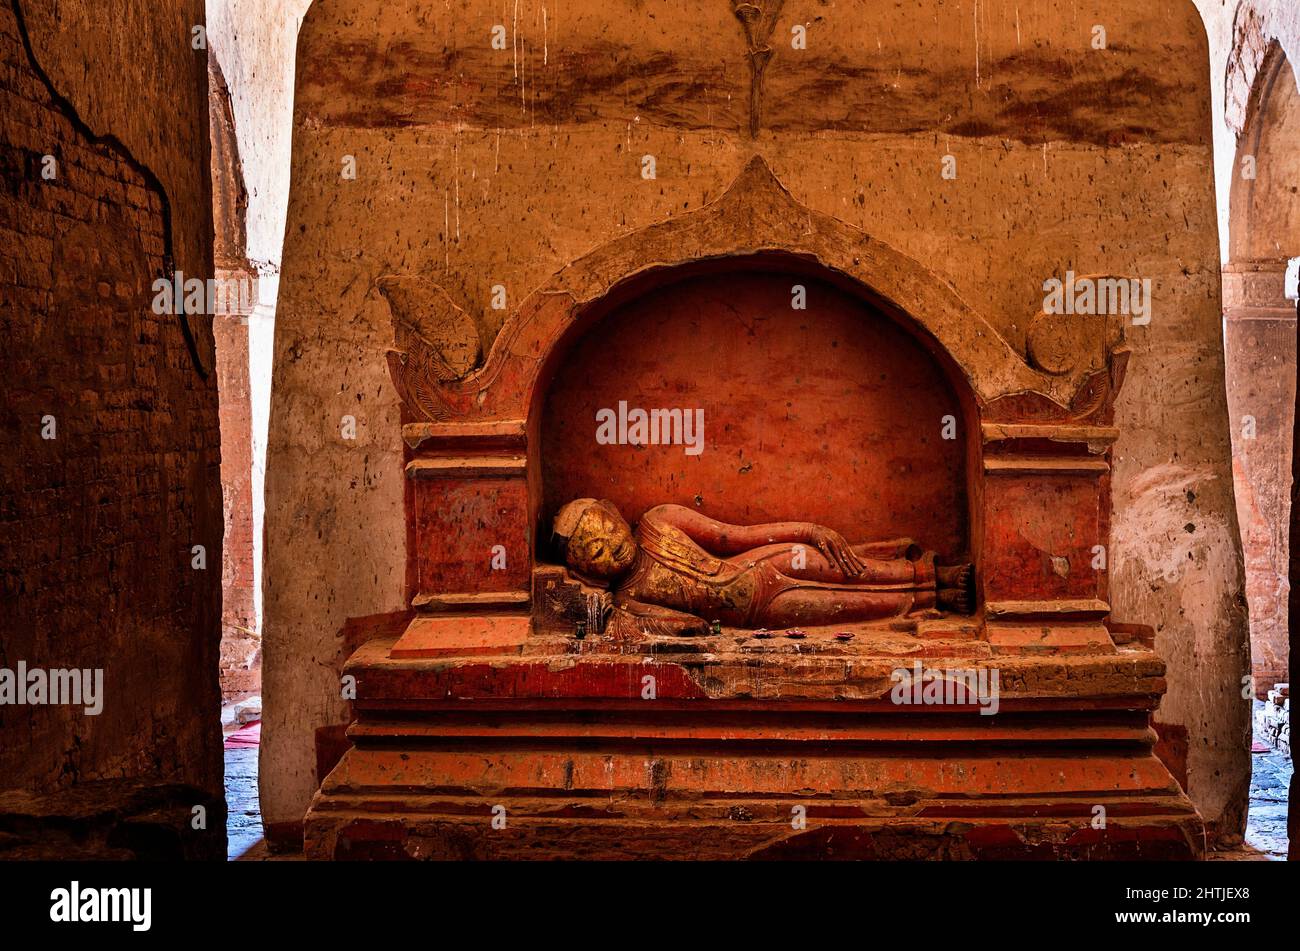 Ancient sculpture of sleeping Buddha placed at stone shabby wall located in Dhammayangyi temple in settlement of Bagan in Myanmar Stock Photo